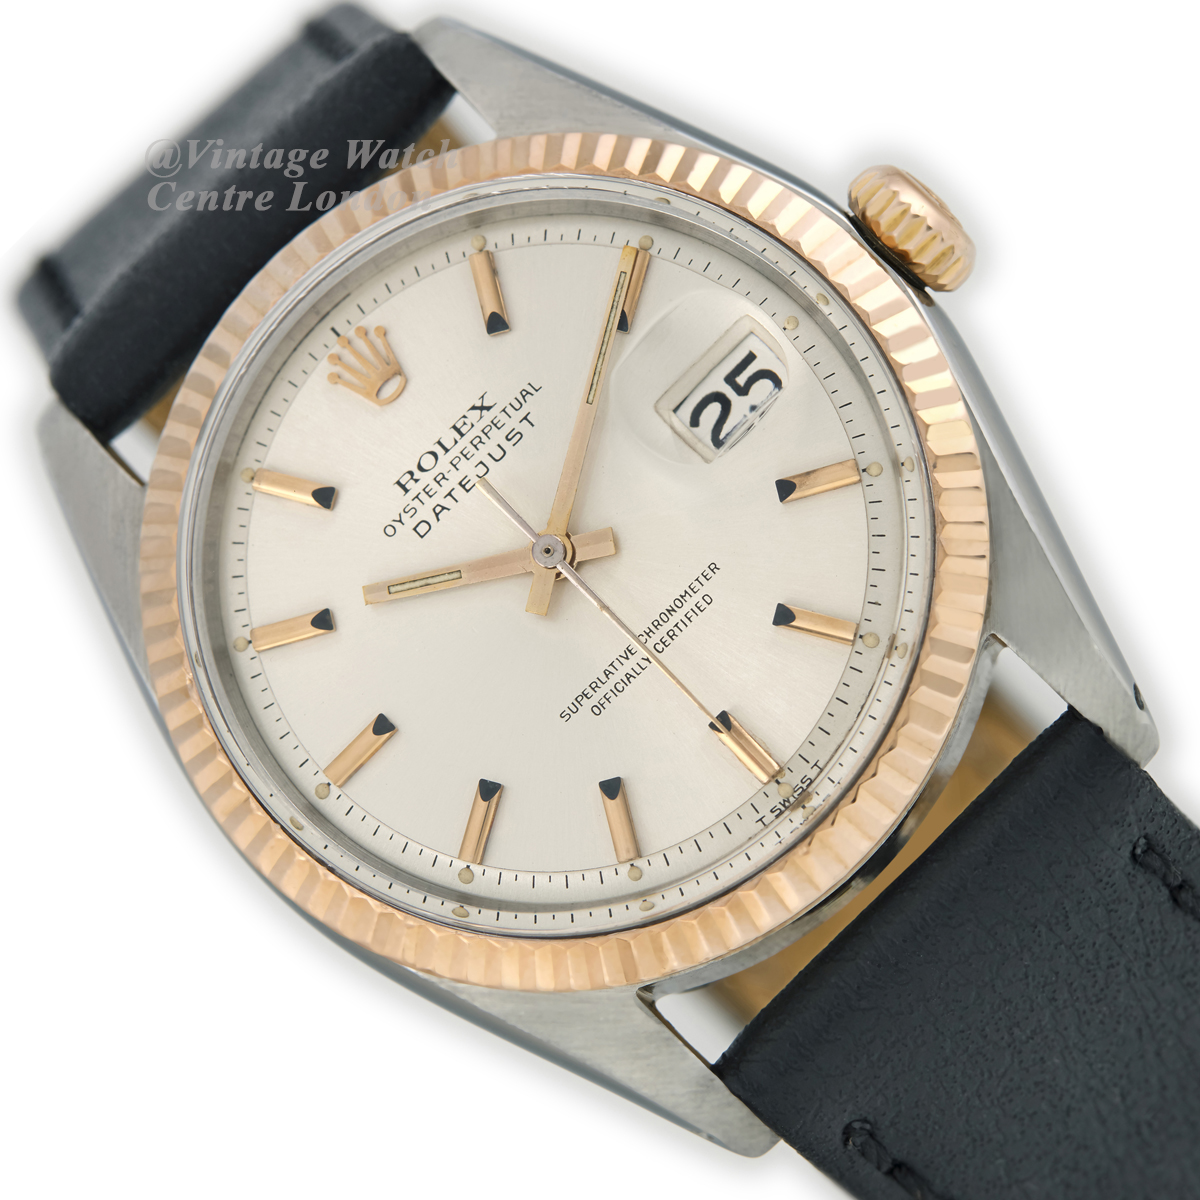 Rolex Oyster Perpetual Datejust Ref.1601 & Gold | Vintage Watch Centre